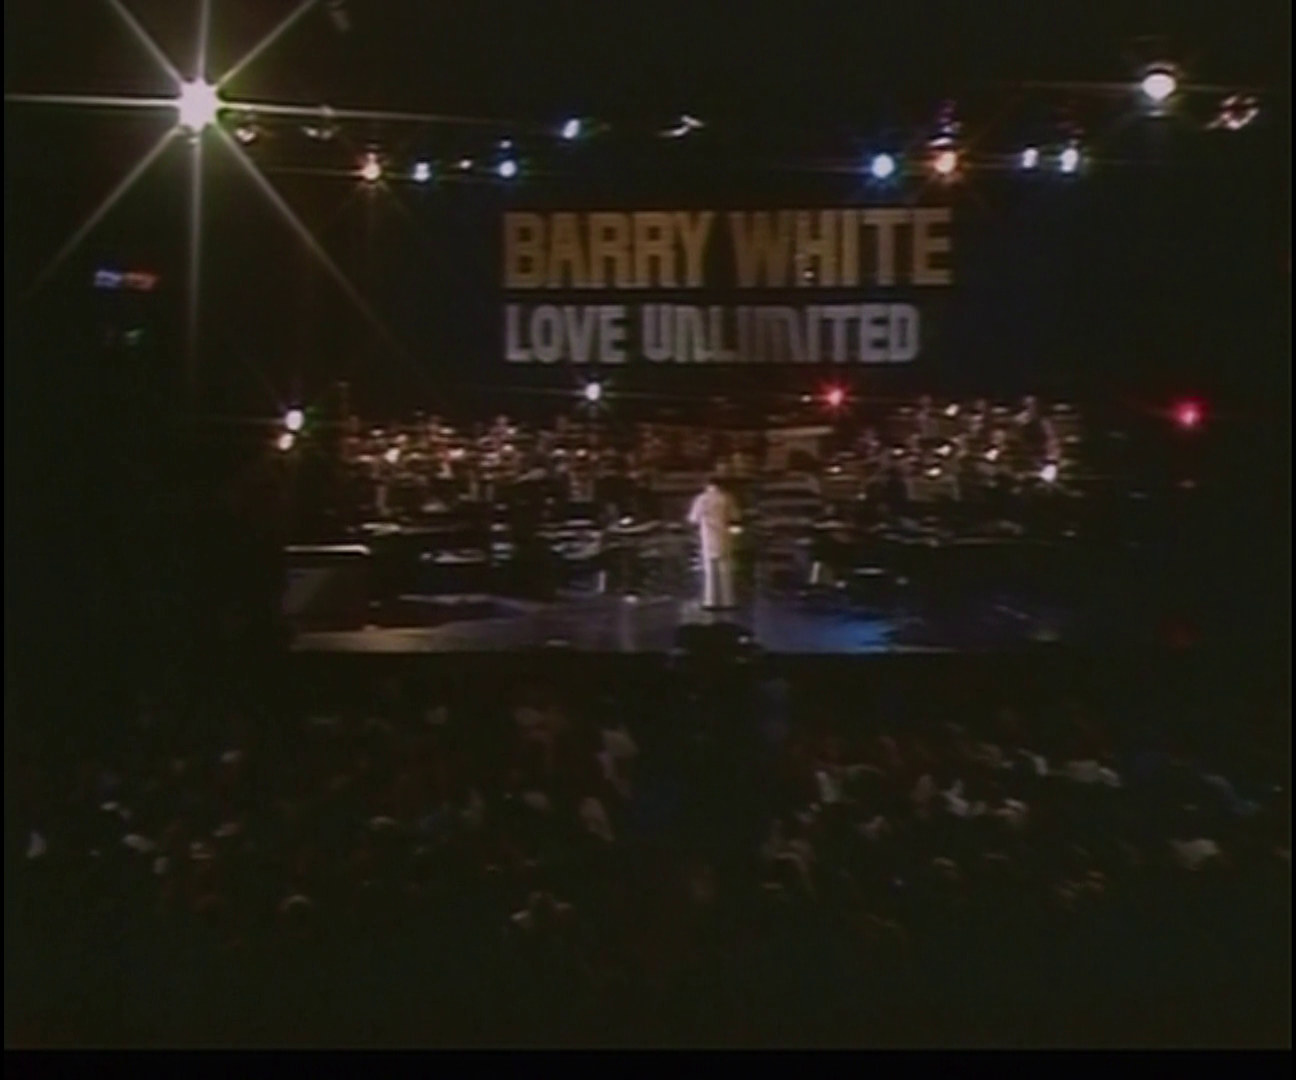 2004 Barry White - The Man And His Music featuring Love Unlimited (2012) [BDRip 1080p] 2